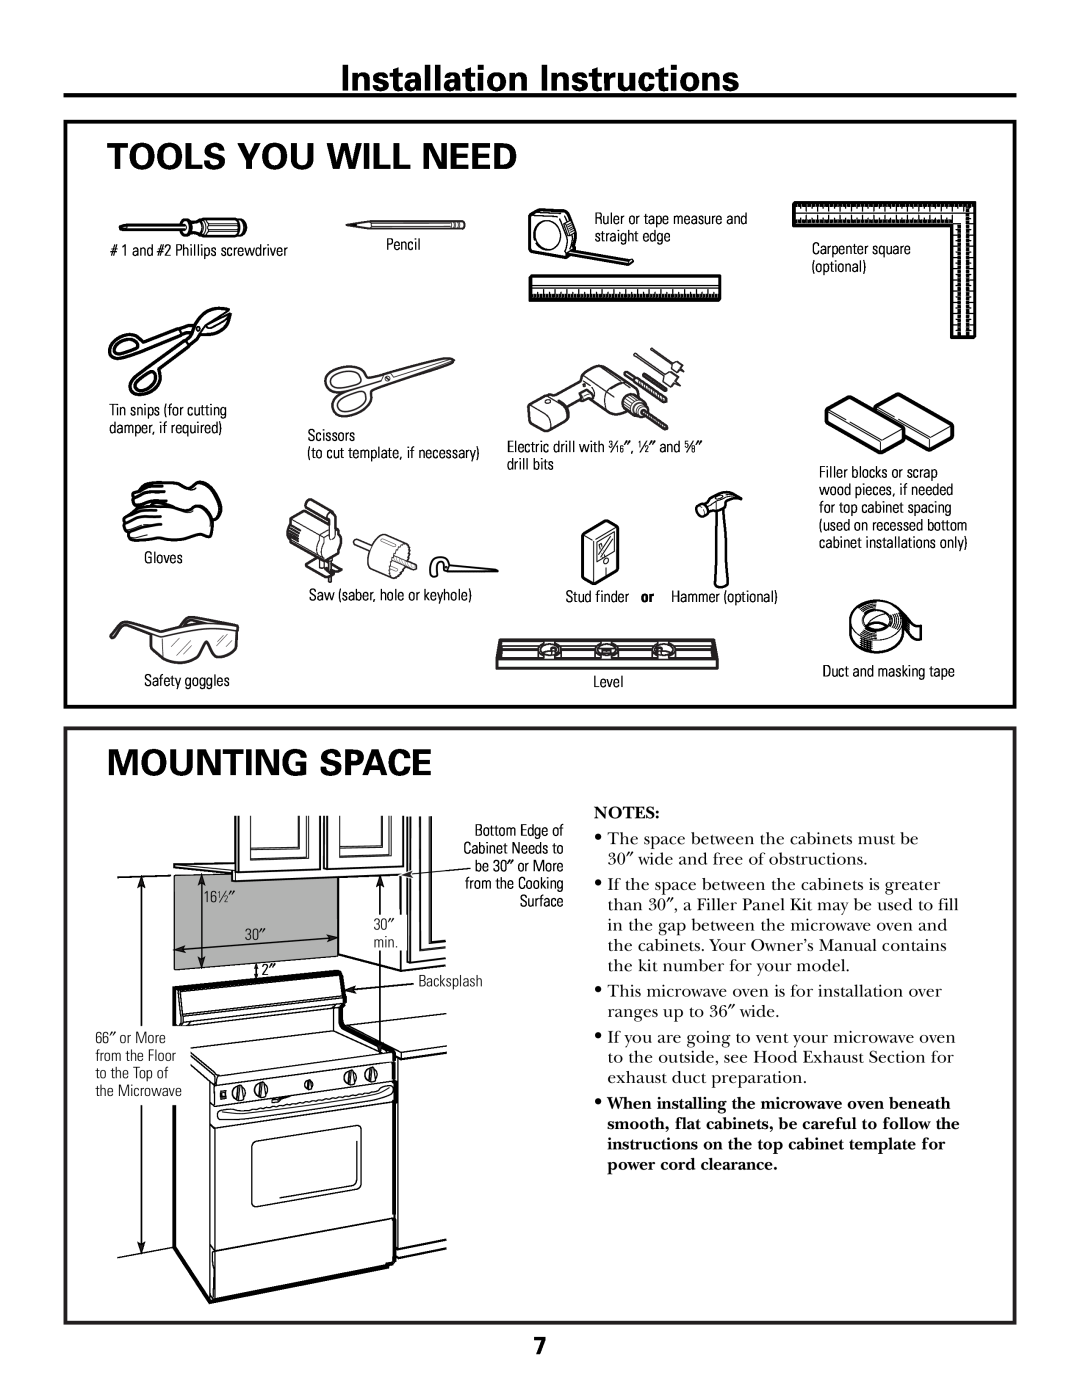 GE CVM2072 warranty Installation Instructions TOOLS YOU WILL NEED, Mounting Space 